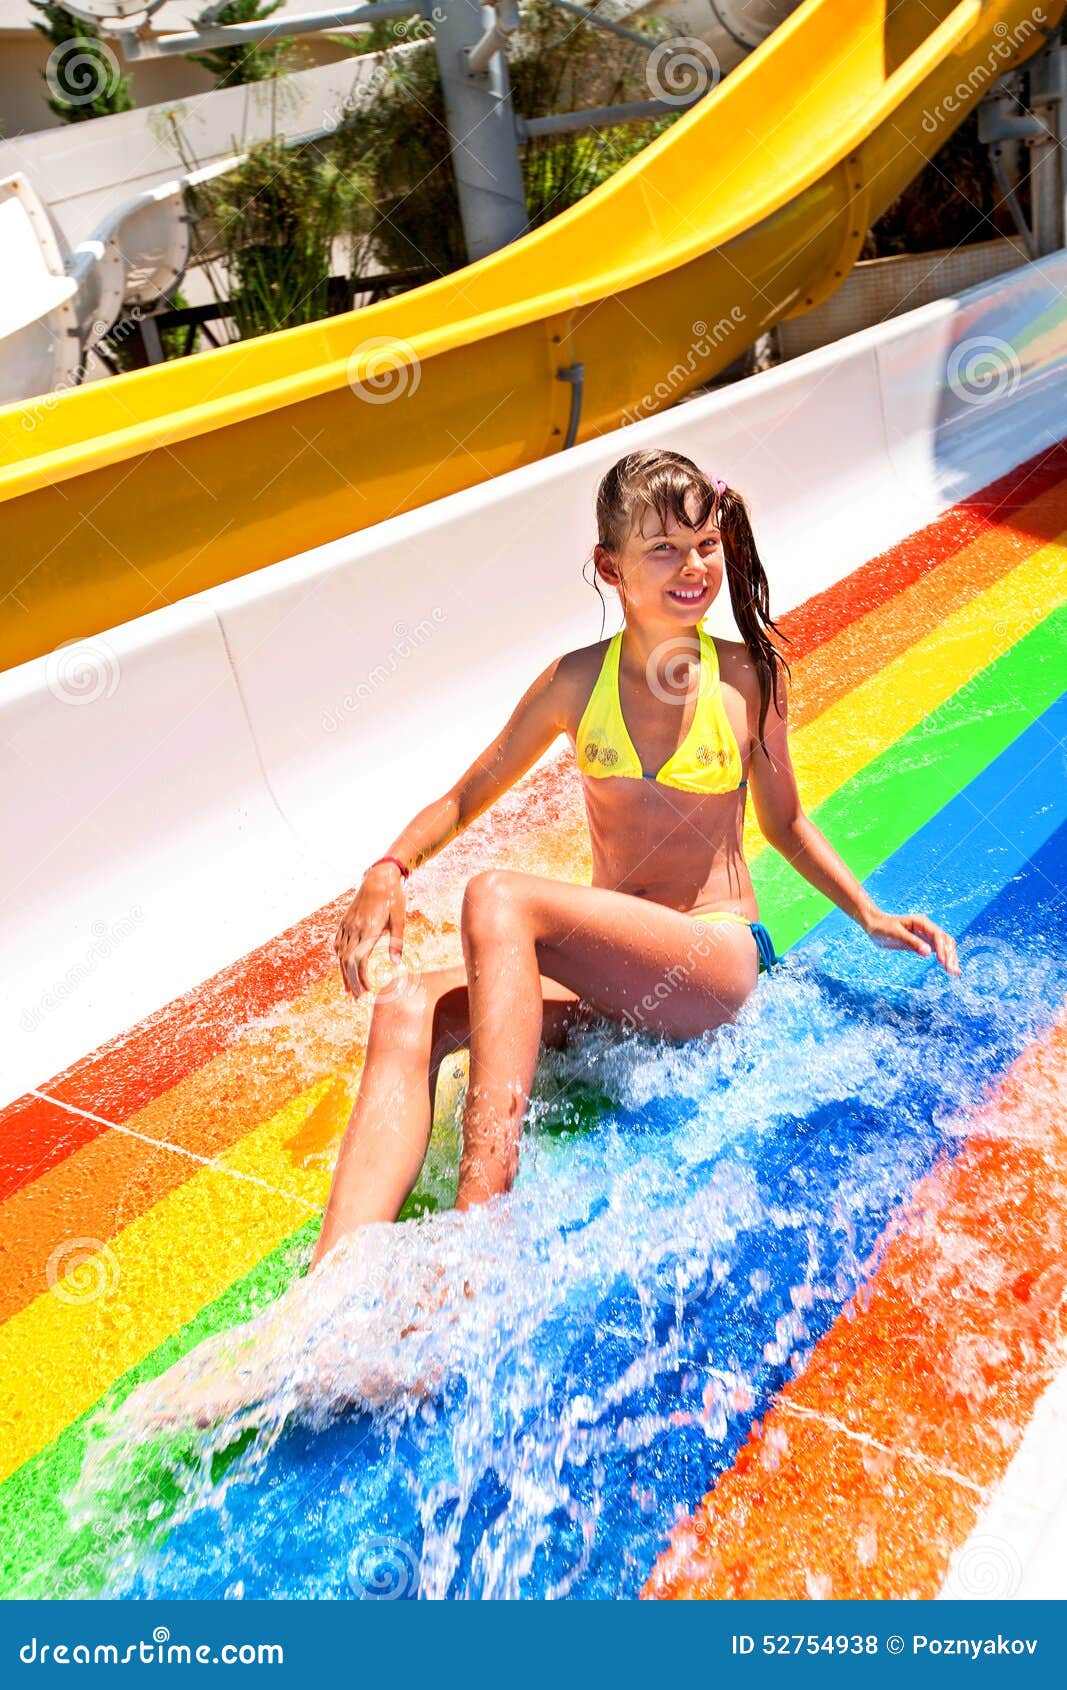 Best of Water slides and bikinis